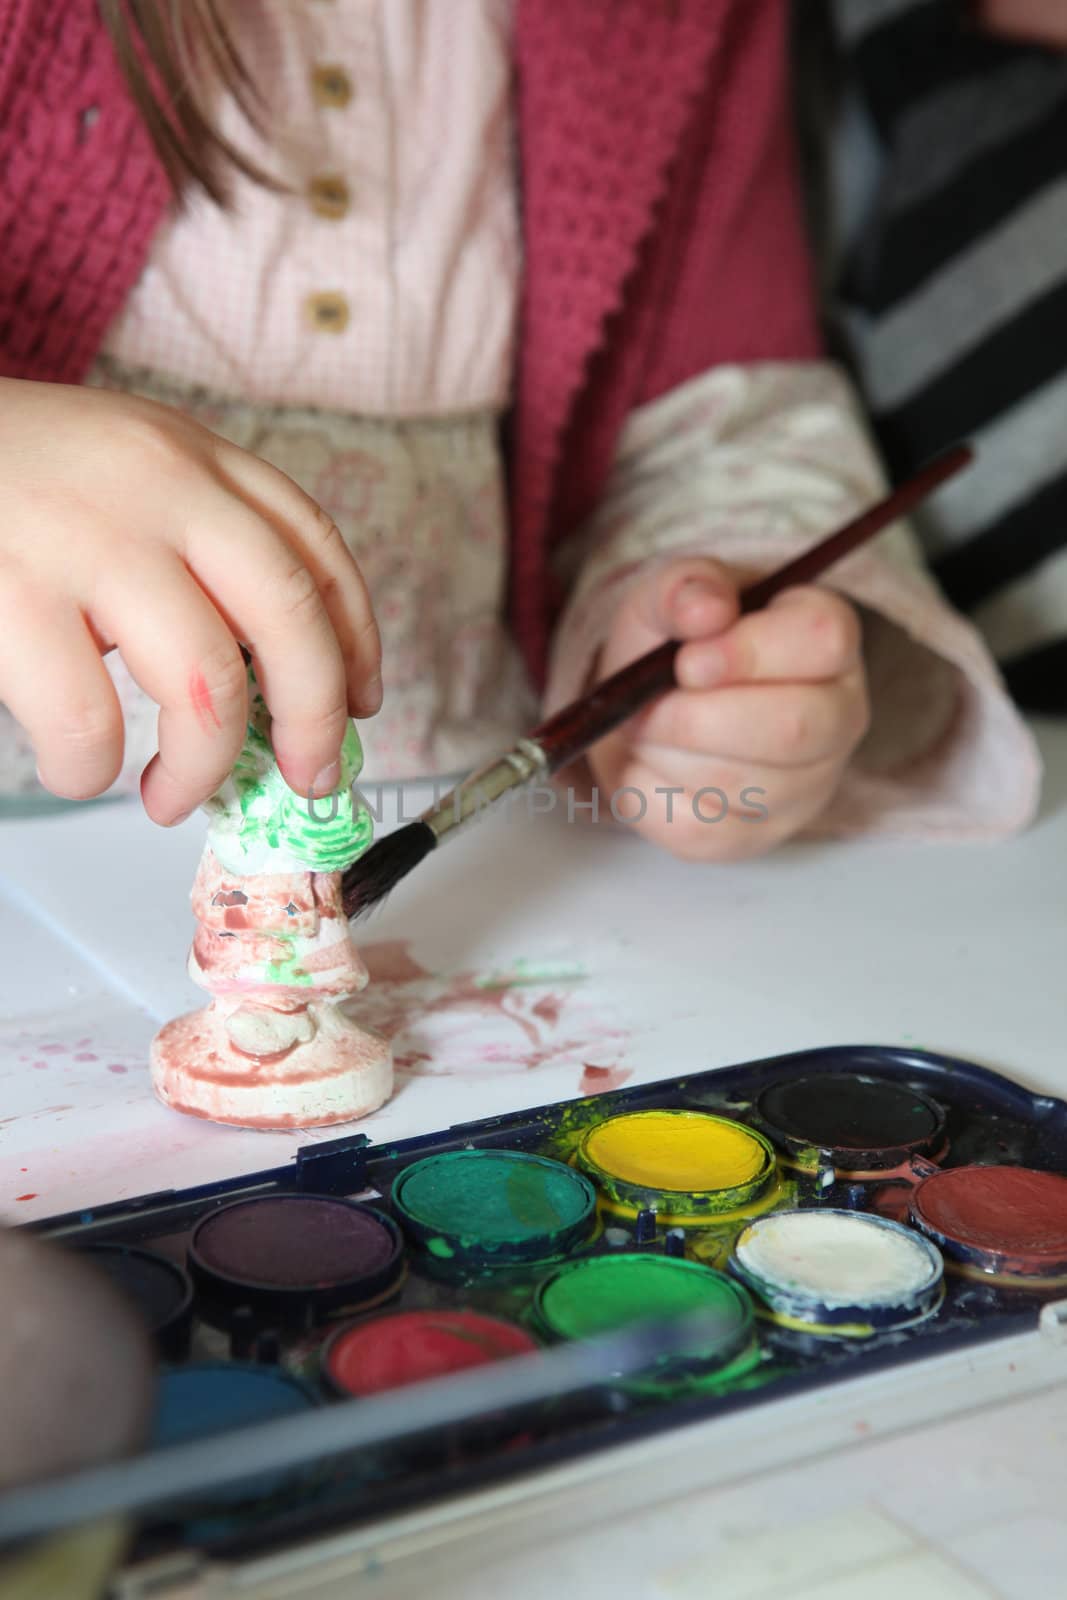 Child painting a plaster figurine by phovoir